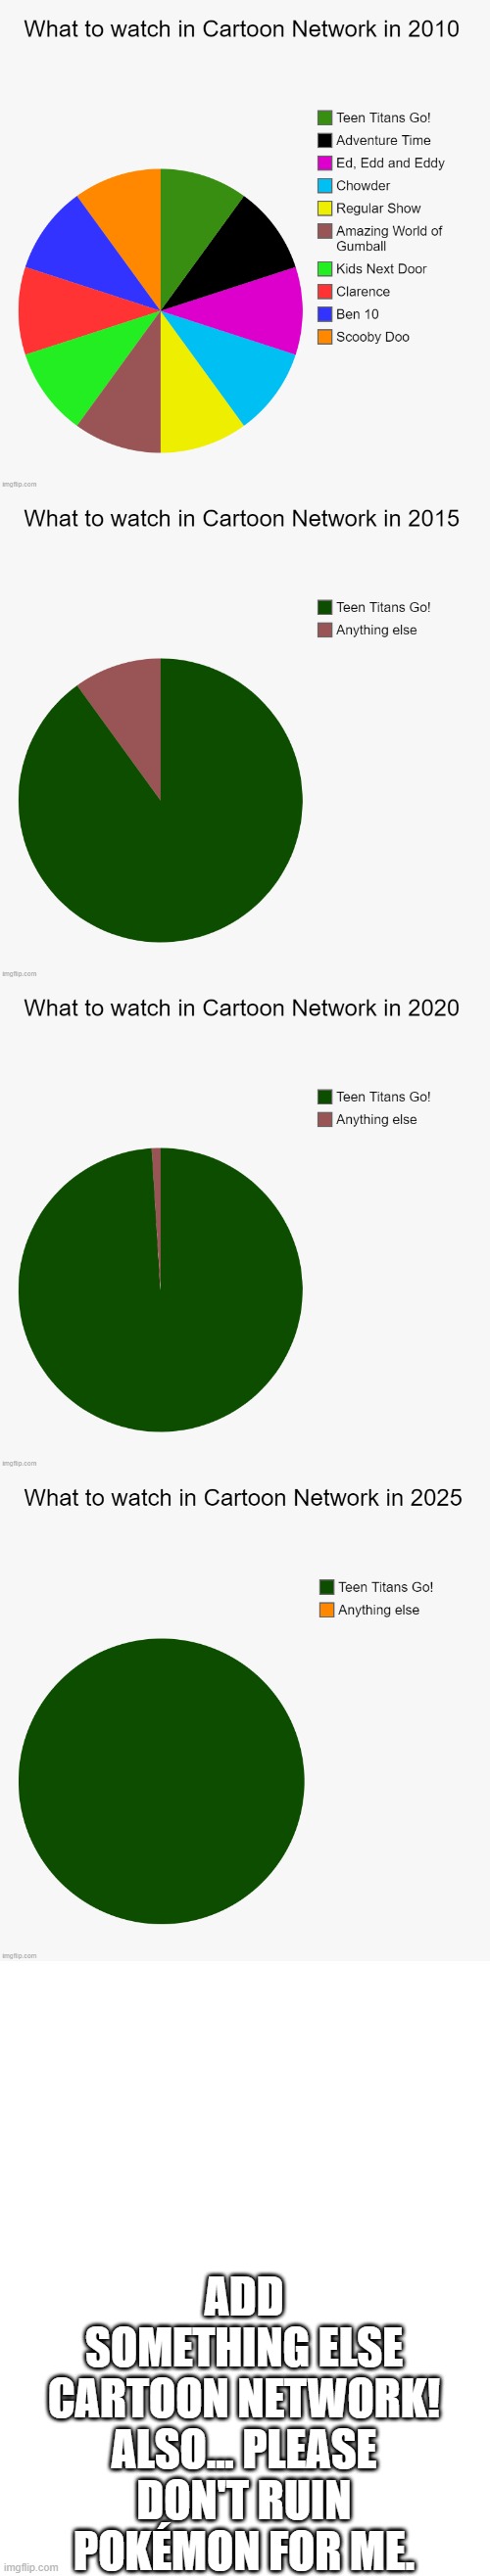 Add something else please. | ADD SOMETHING ELSE CARTOON NETWORK! ALSO... PLEASE DON'T RUIN POKÉMON FOR ME. | image tagged in white long template,cartoon network,charts,pie charts,memes,why are you reading this | made w/ Imgflip meme maker